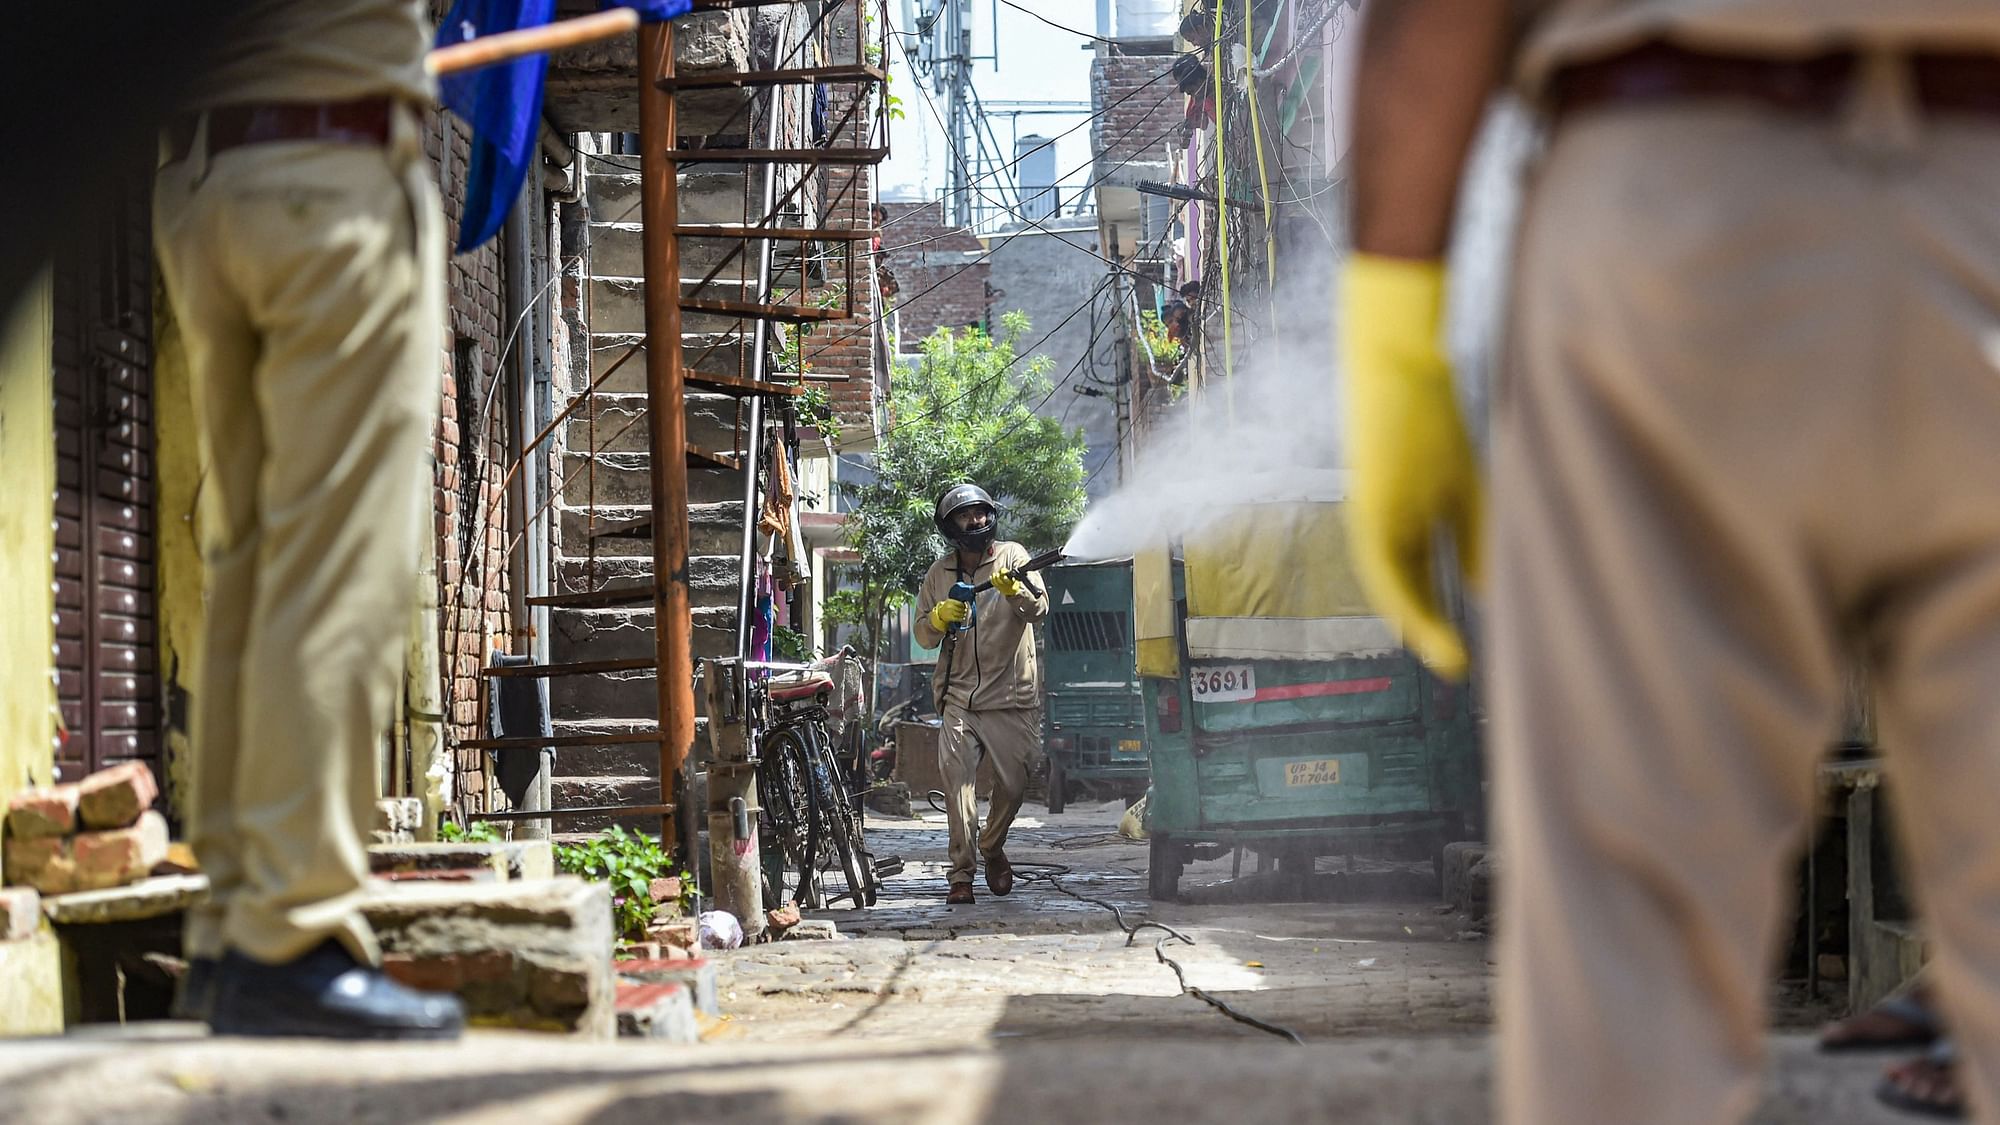 A worker sprays disinfectant at Nandgram village, marked as a COVID-19 hotspot, during the nationwide lockdown to curb the spread of coronavirus, in Ghaziabad, Thursday.